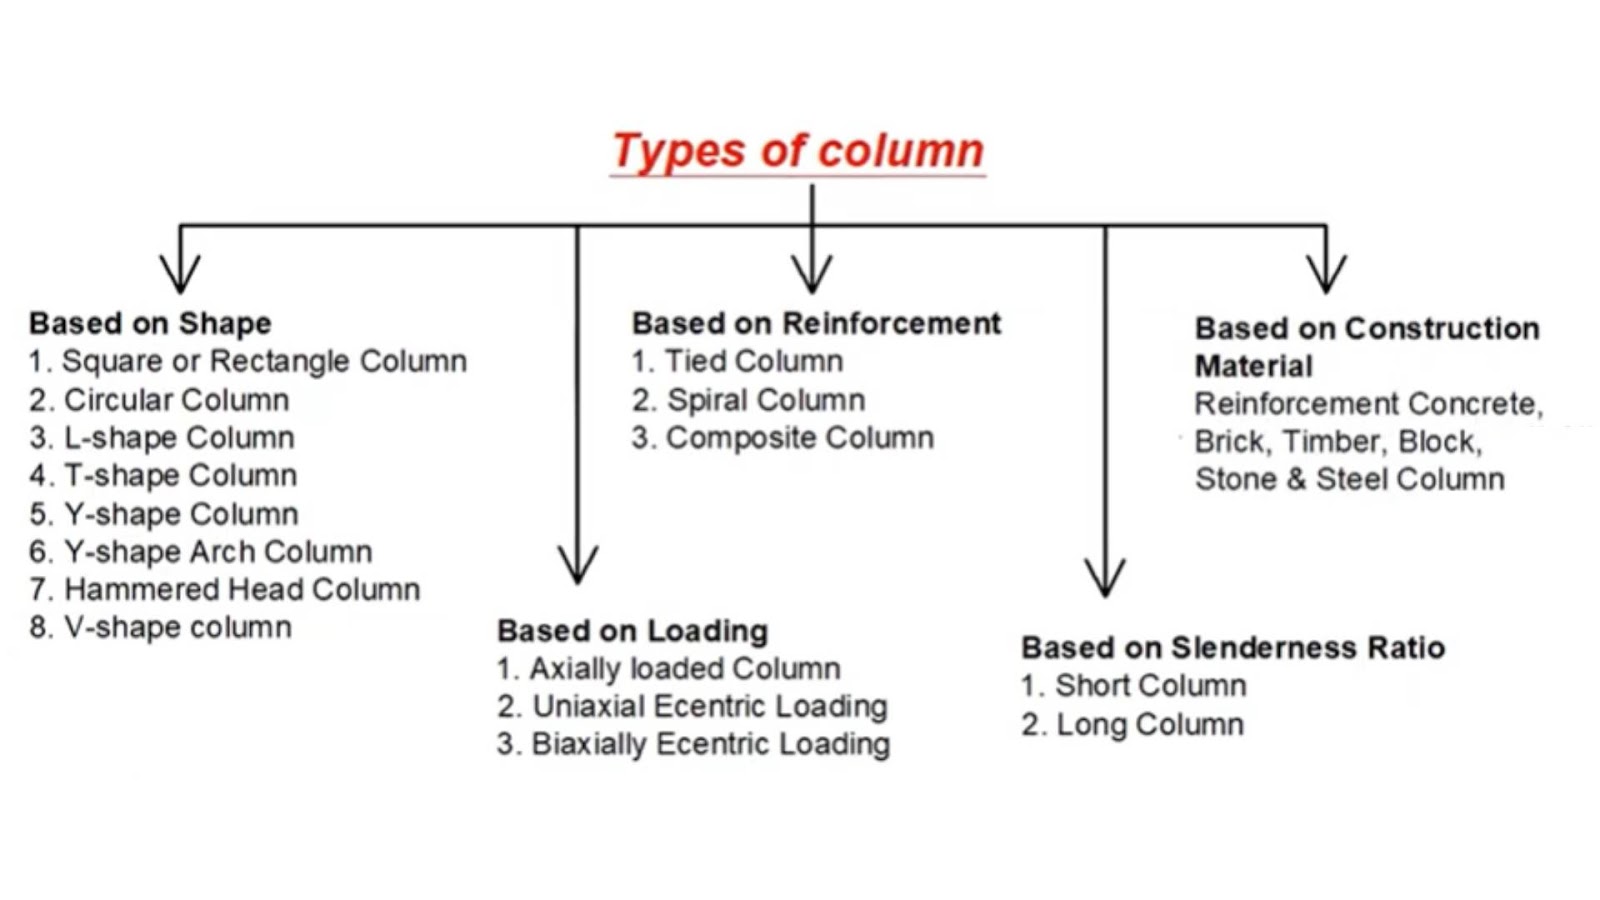 How to classify the column?